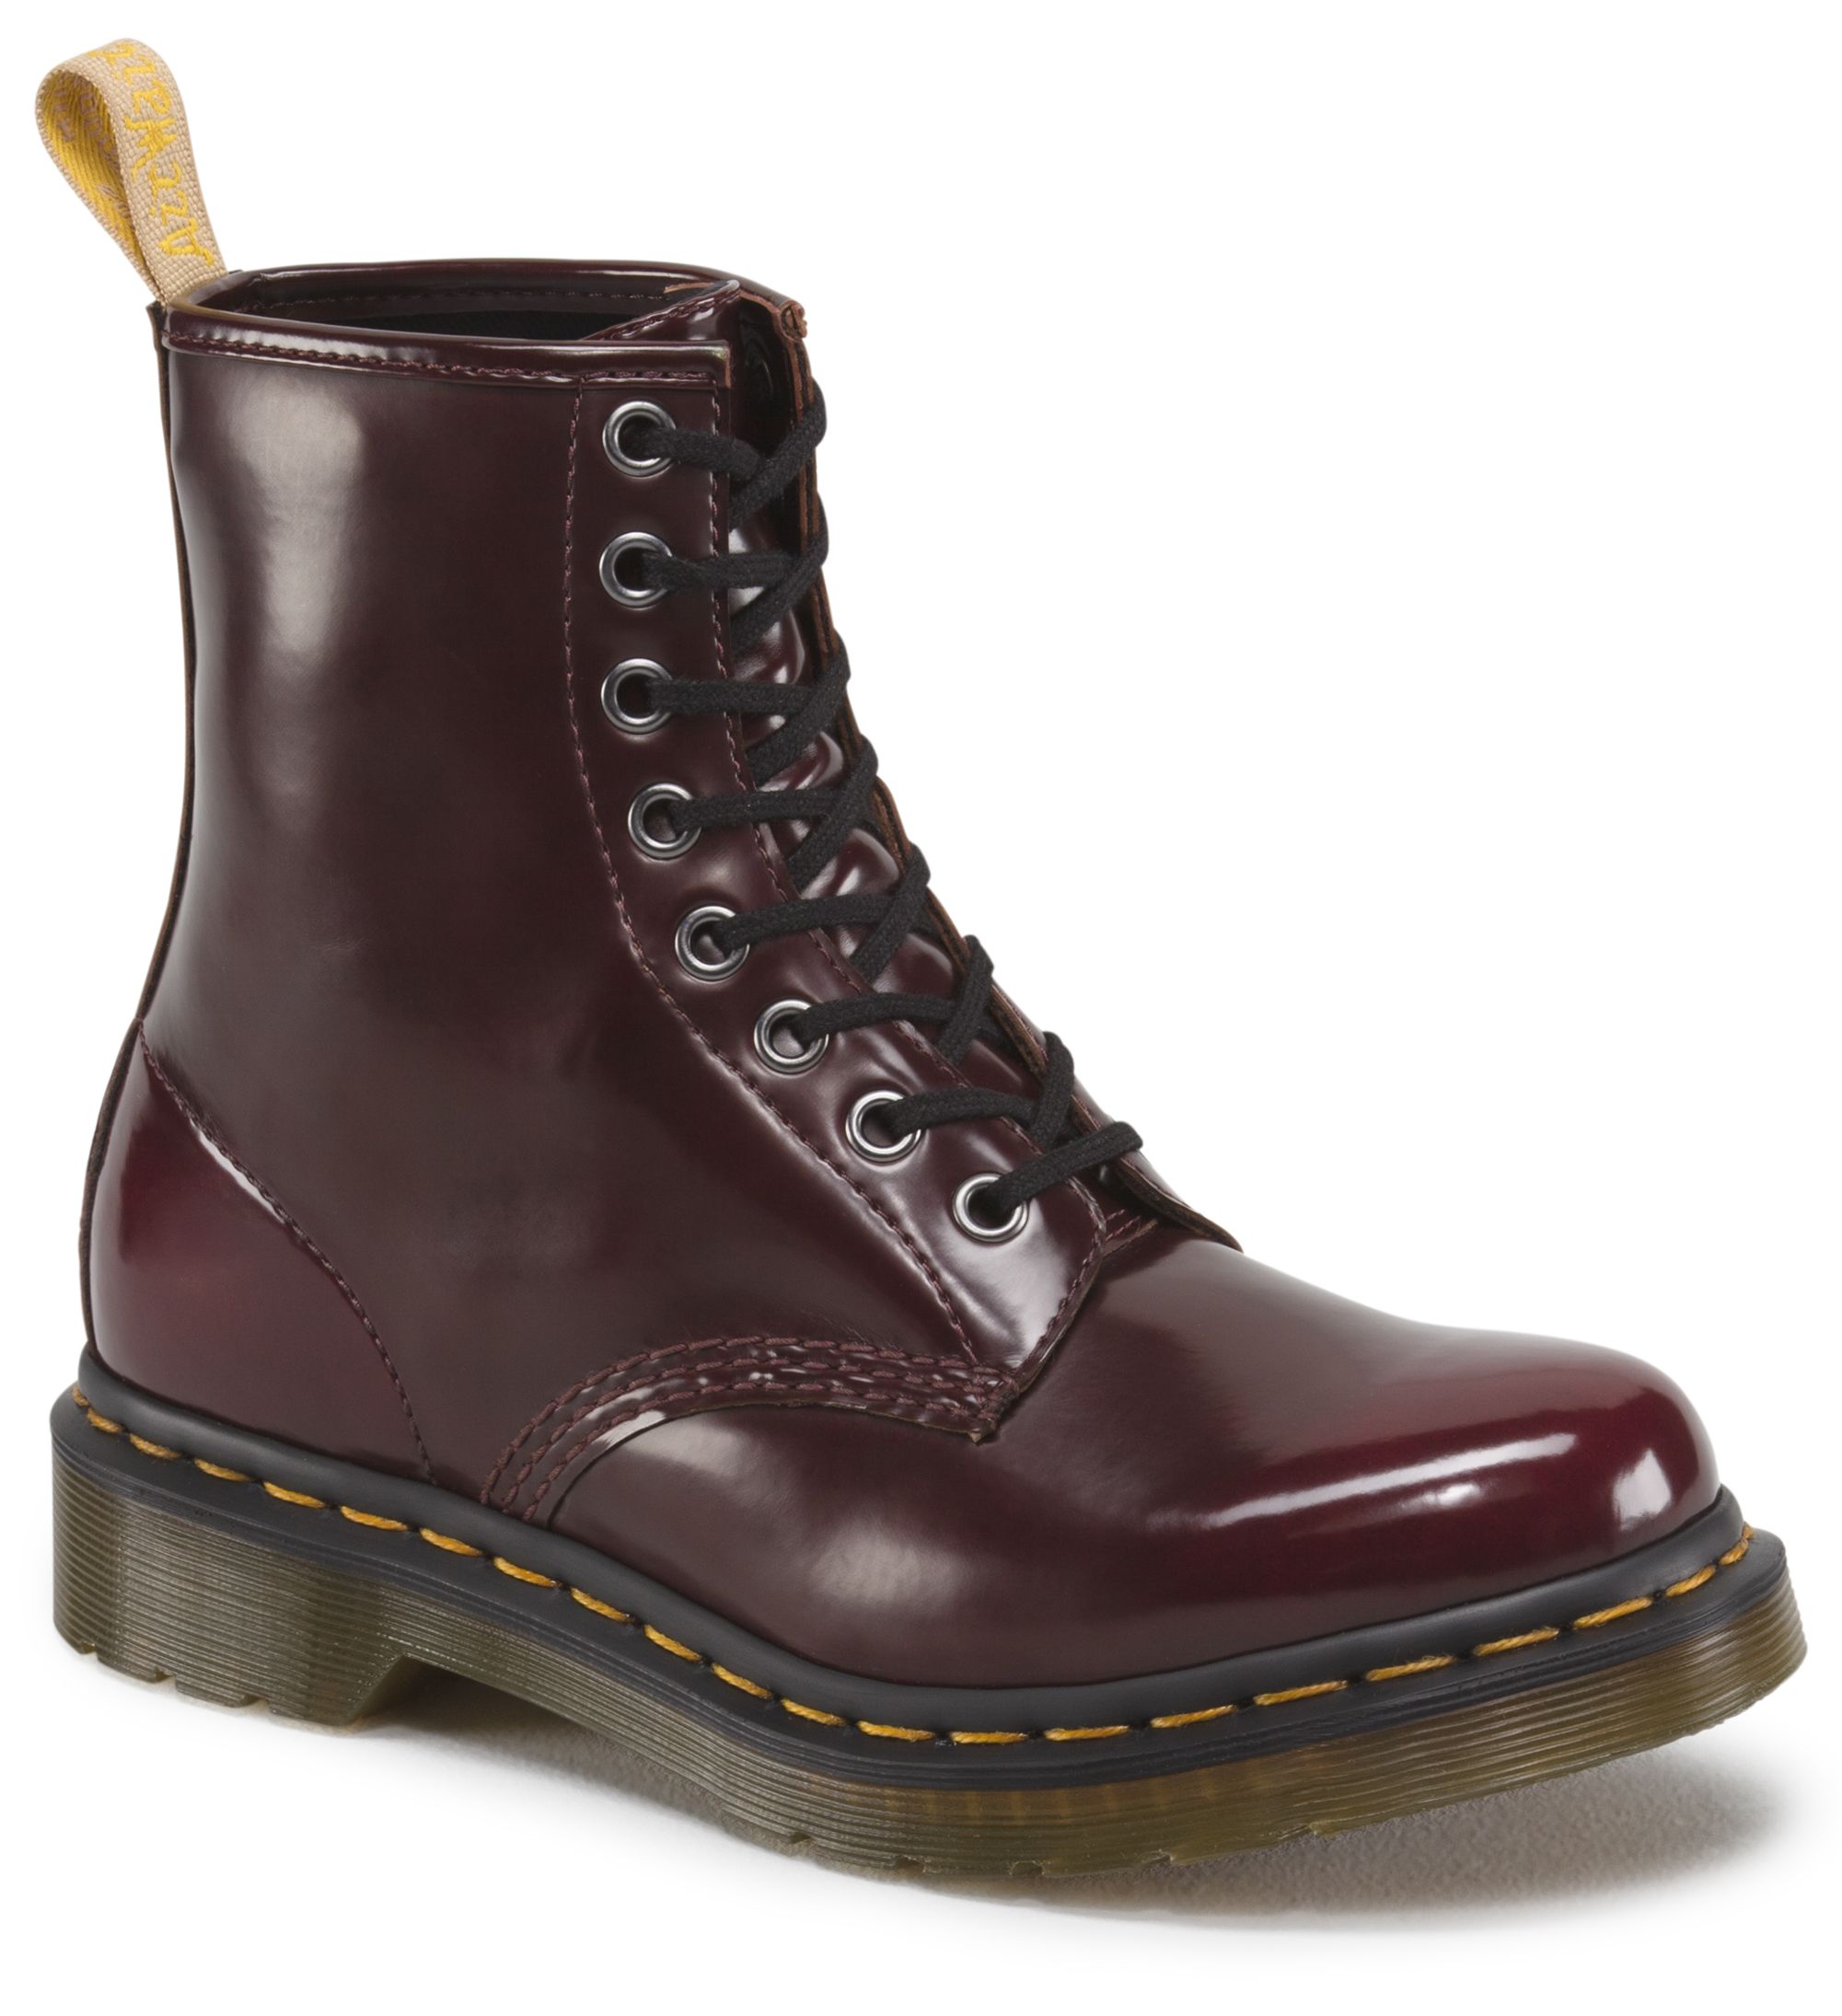 Perenne Restricción metal Dr. Martens Vegan Boots Recalled by Airwair Due to Chemical Exposure Hazard  | CPSC.gov